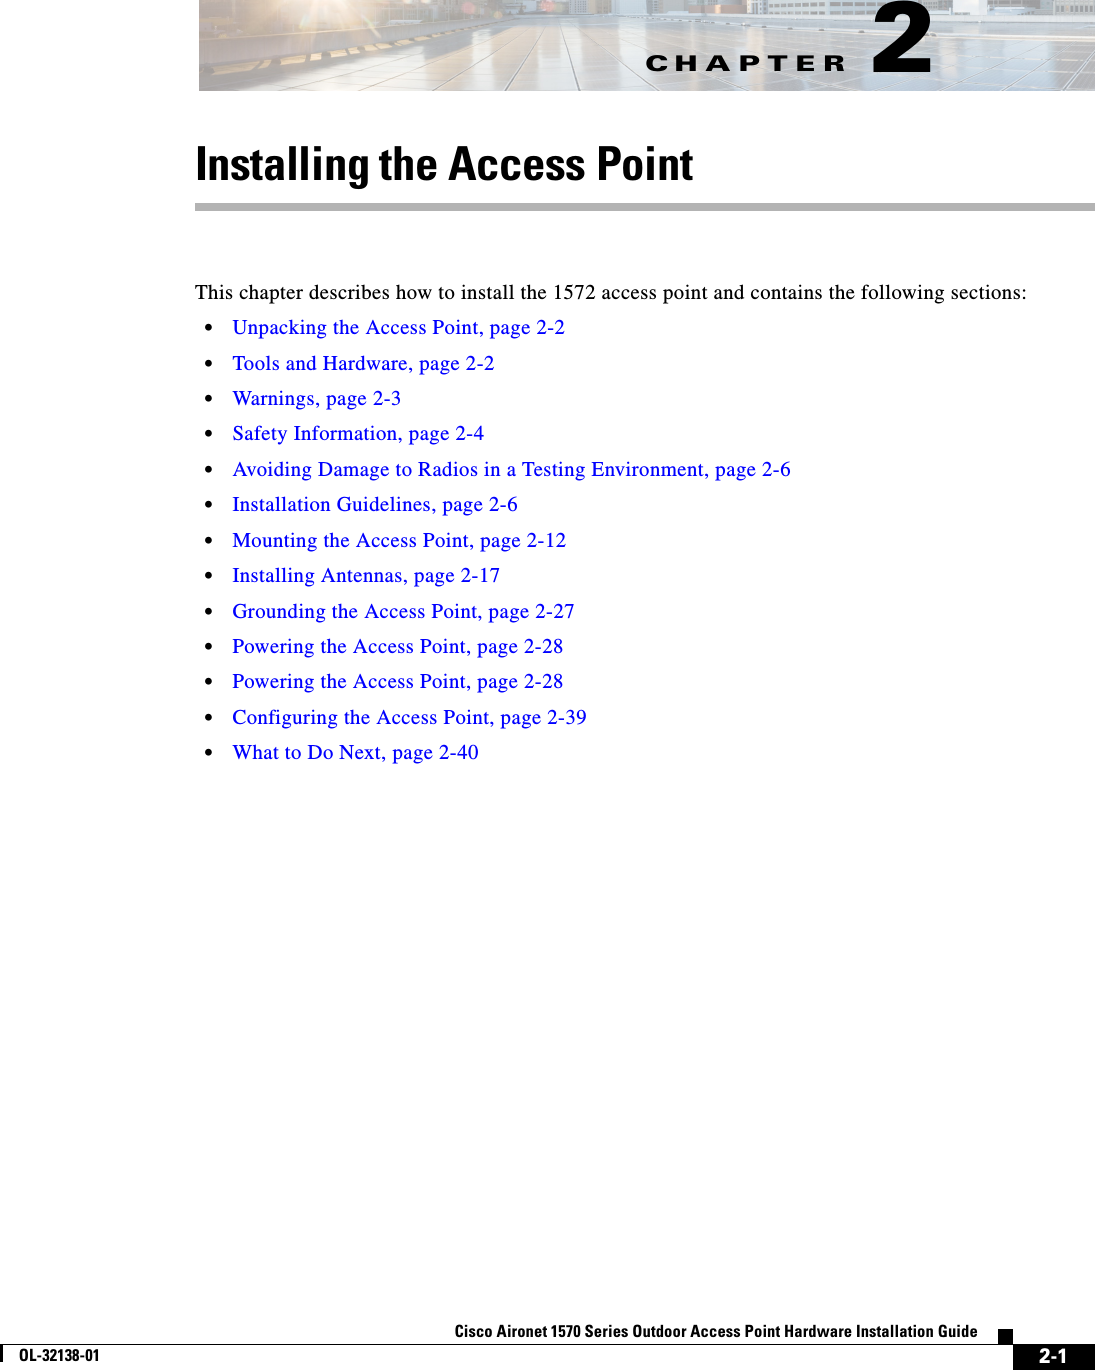 CHAPTER 2-1Cisco Aironet 1570 Series Outdoor Access Point Hardware Installation GuideOL-32138-012Installing the Access PointThis chapter describes how to install the 1572 access point and contains the following sections:•Unpacking the Access Point, page 2-2•Tools and Hardware, page 2-2•Warnings, page 2-3•Safety Information, page 2-4•Avoiding Damage to Radios in a Testing Environment, page 2-6•Installation Guidelines, page 2-6•Mounting the Access Point, page 2-12•Installing Antennas, page 2-17•Grounding the Access Point, page 2-27•Powering the Access Point, page 2-28•Powering the Access Point, page 2-28•Configuring the Access Point, page 2-39•What to Do Next, page 2-40